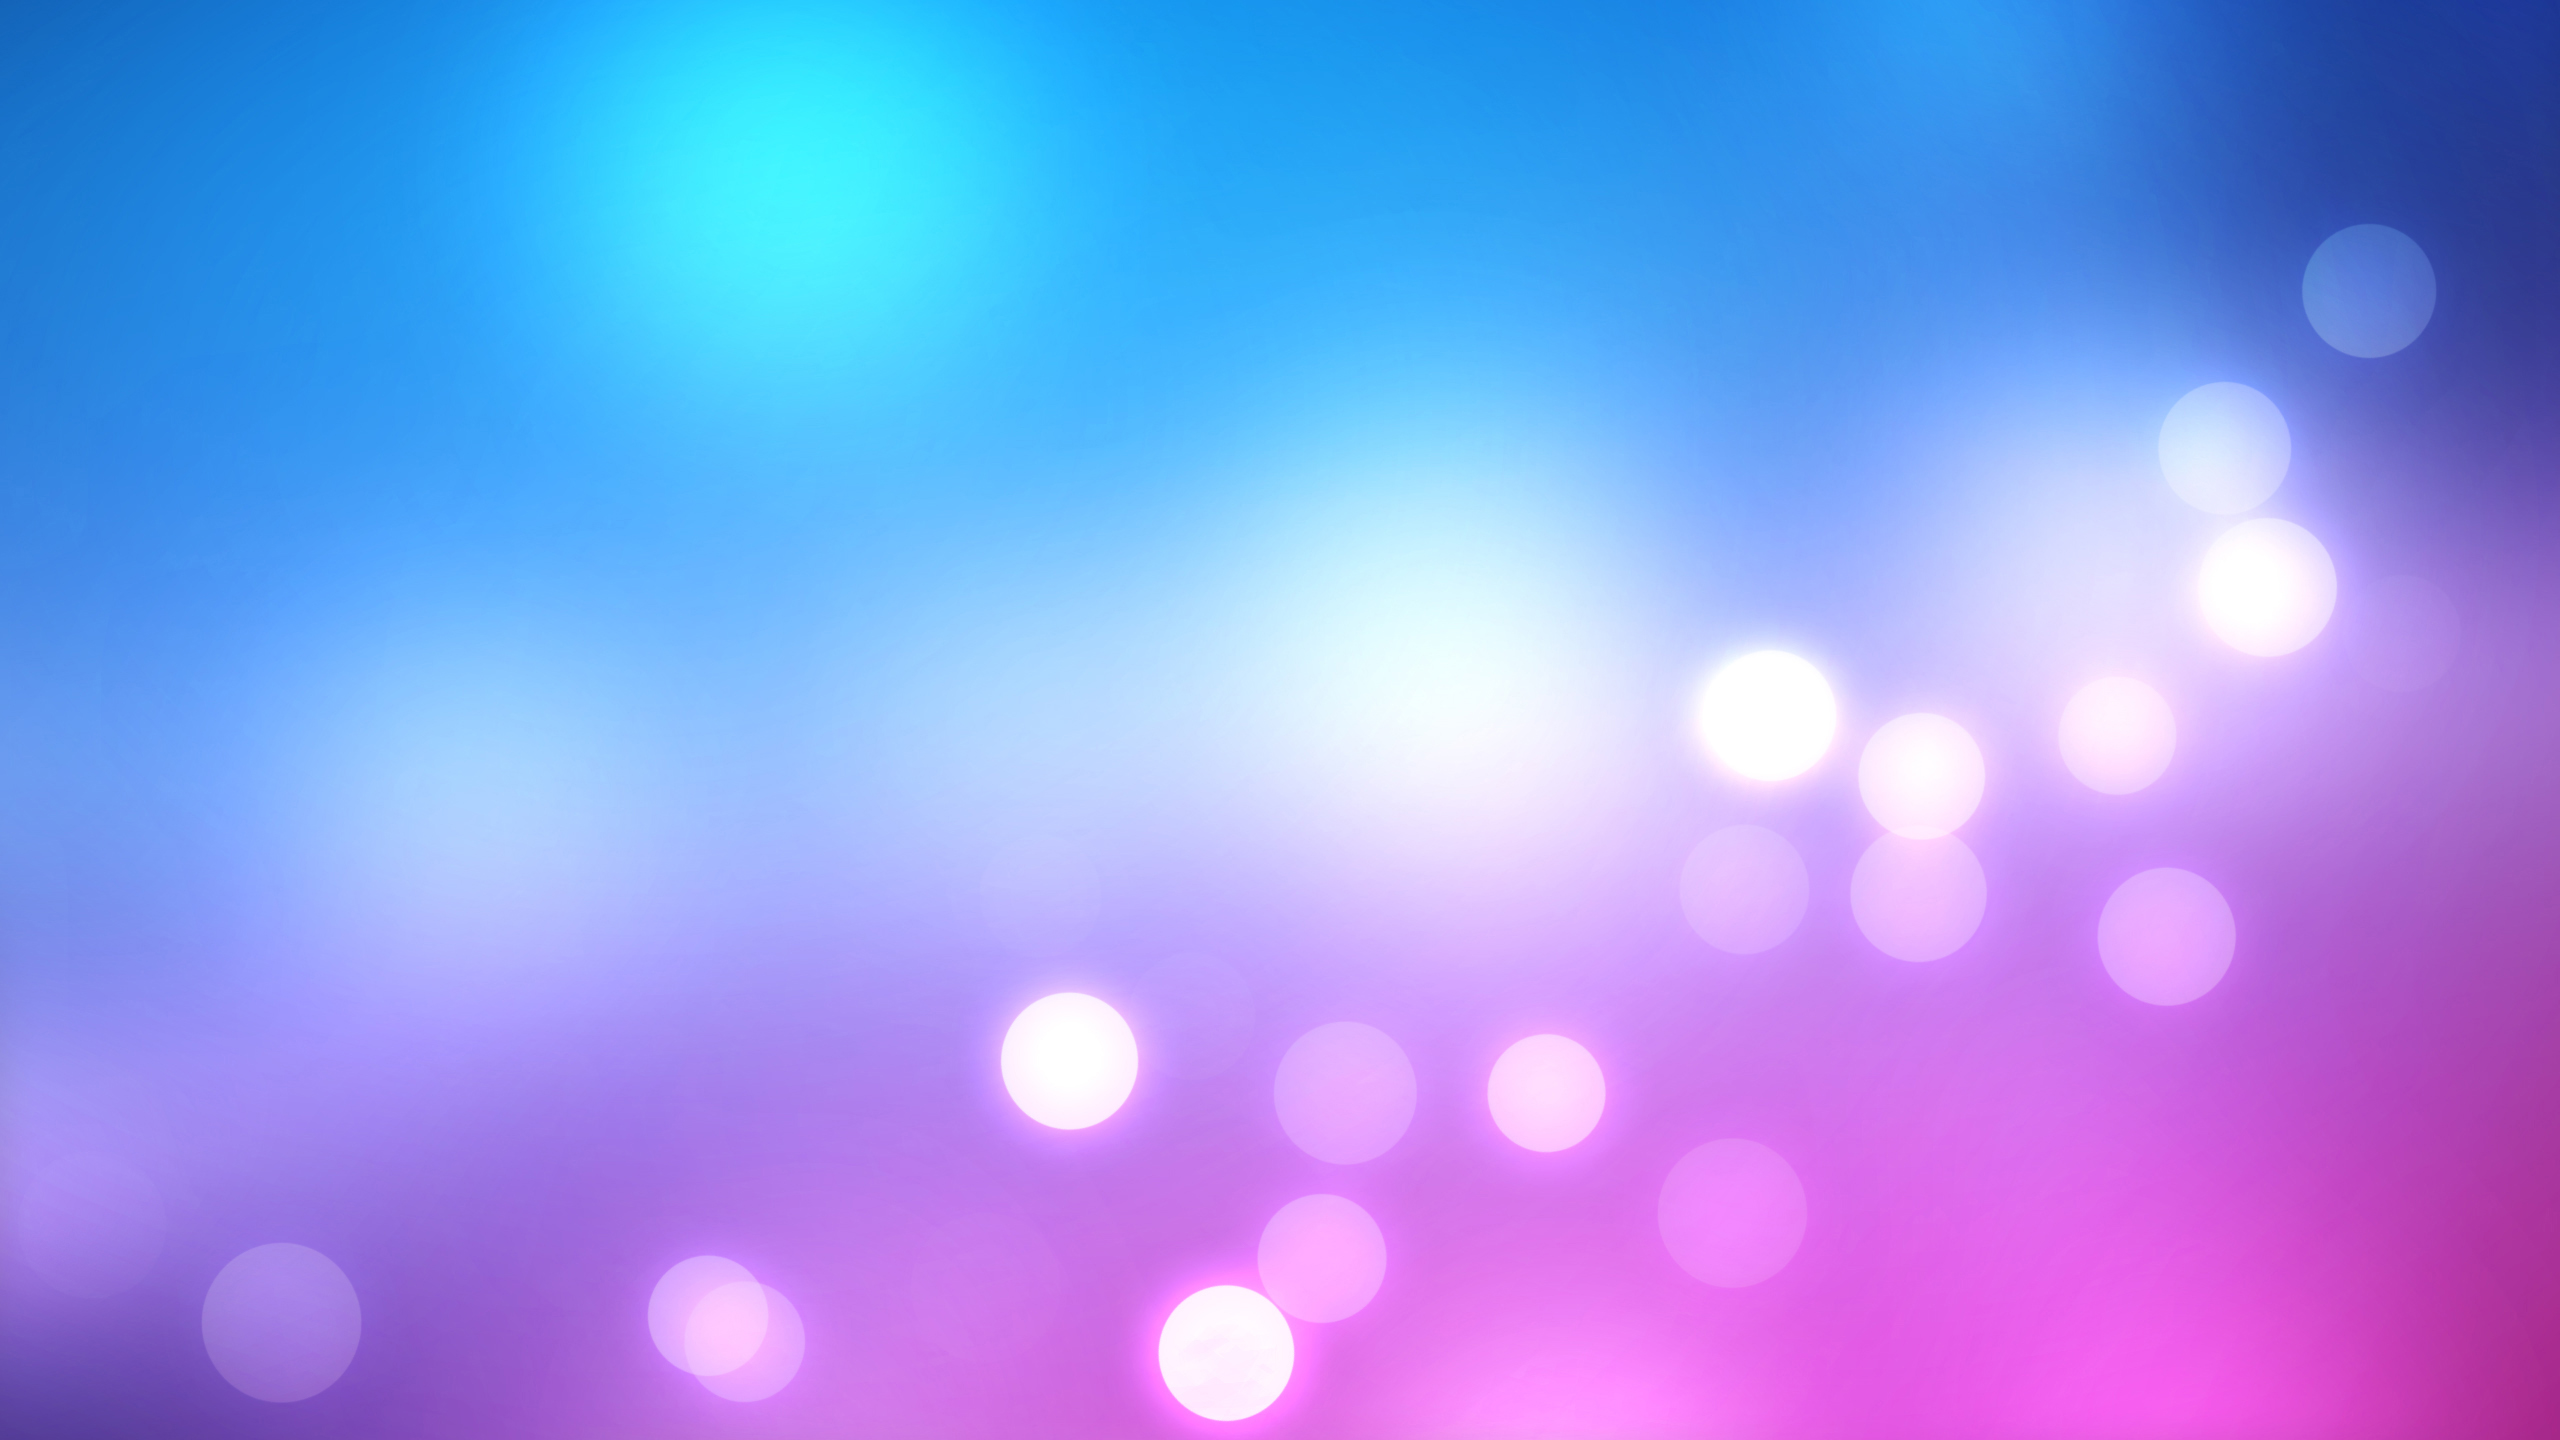 Purple And Blue Wallpapers Images amp Pictures   Becuo